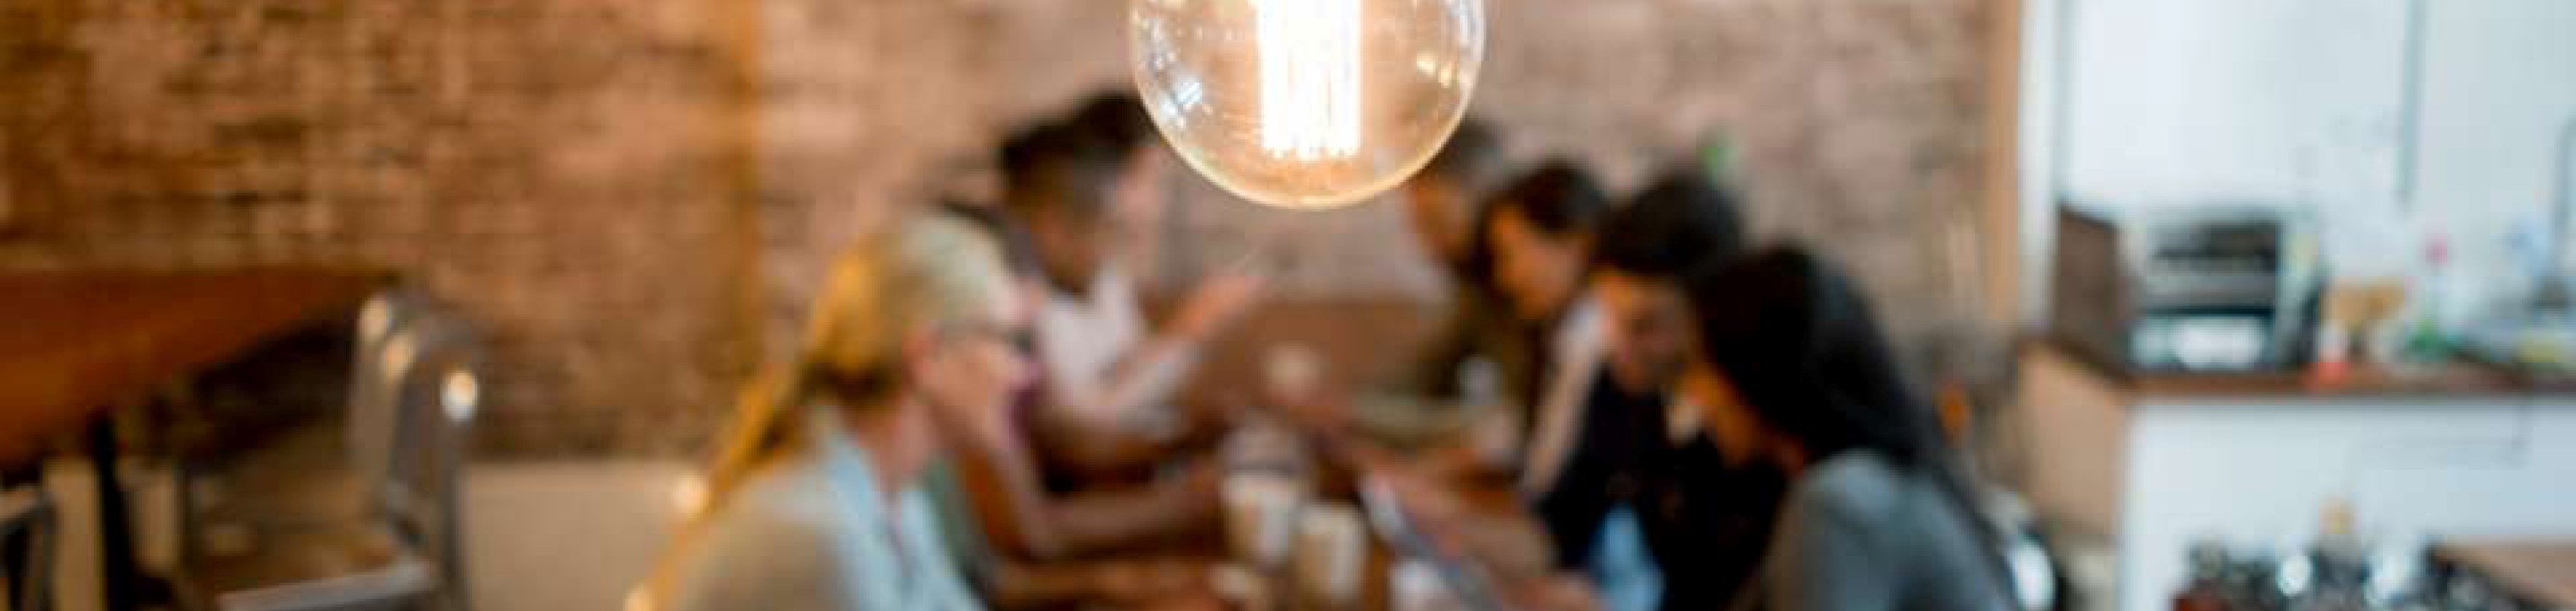 people sitting at table with a light bulb above